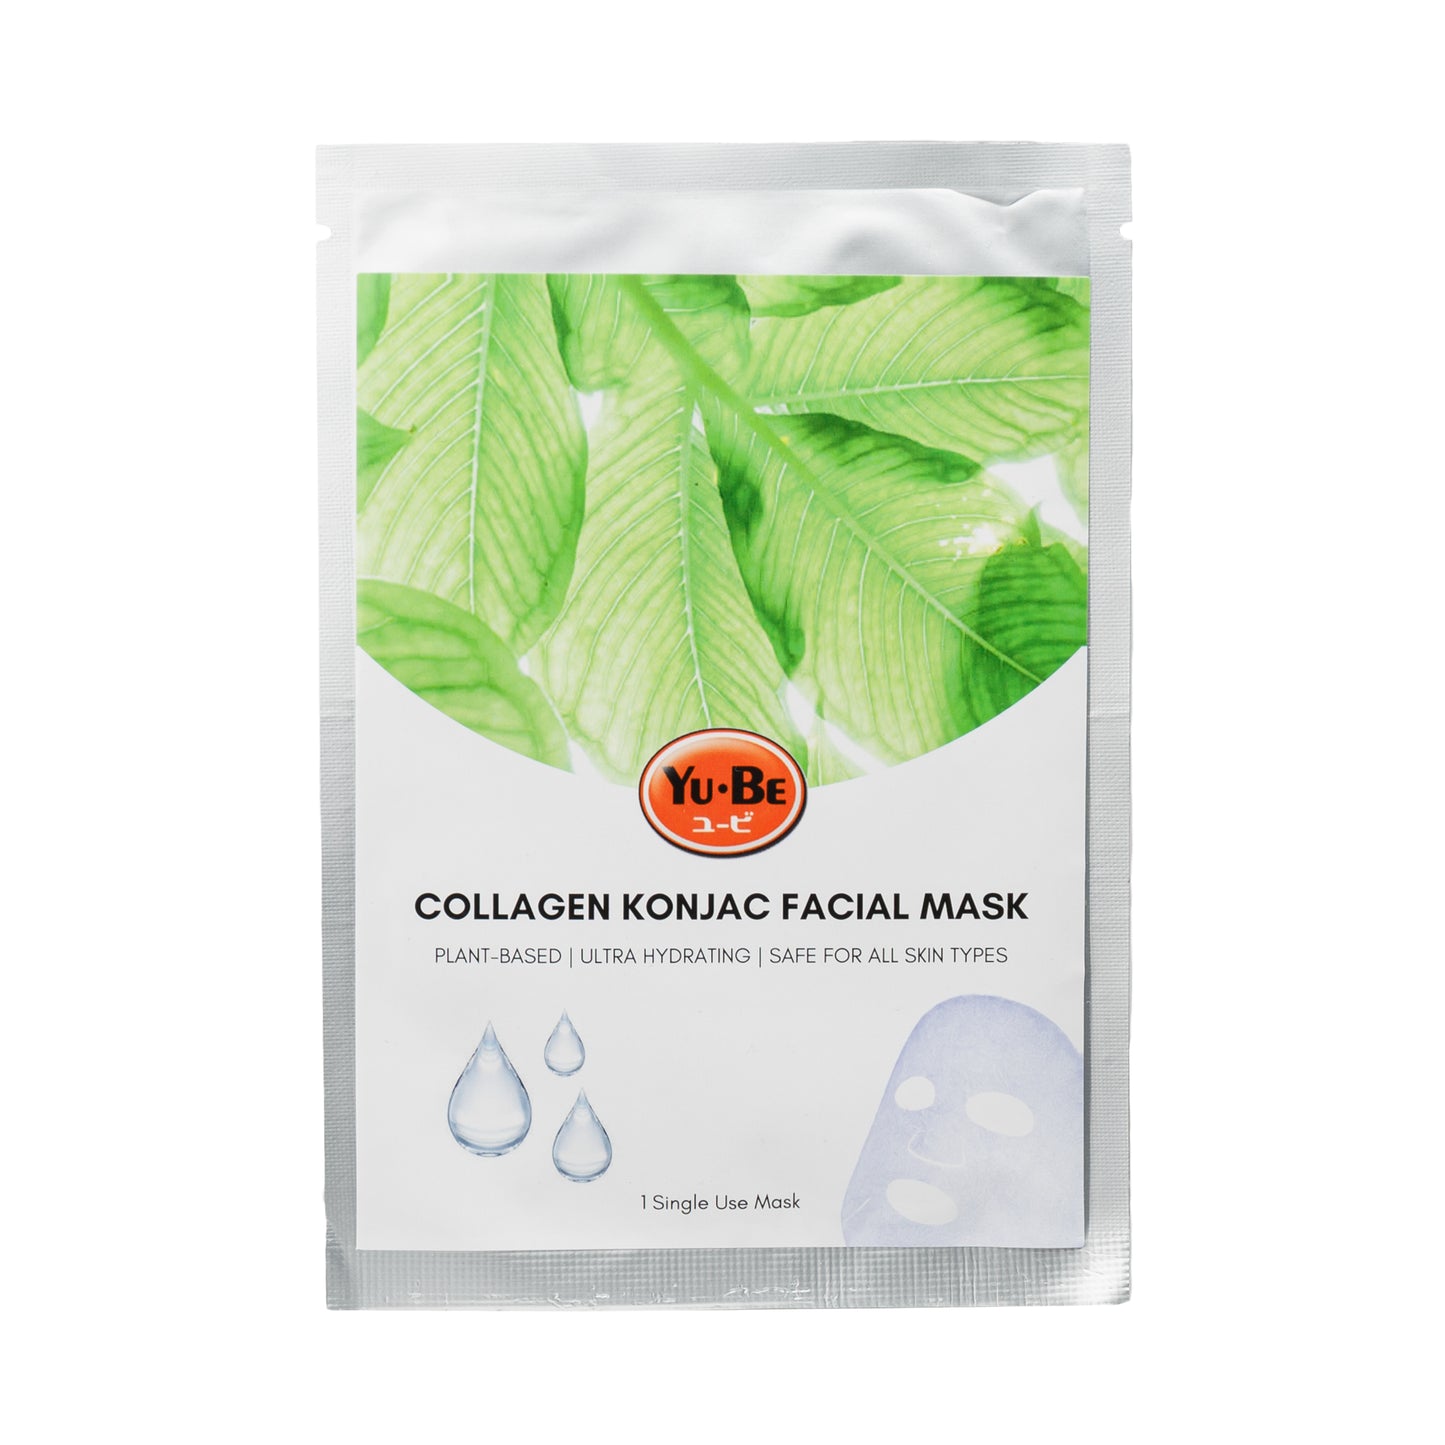 Primary Image of Collagen Konjac Facial Mask